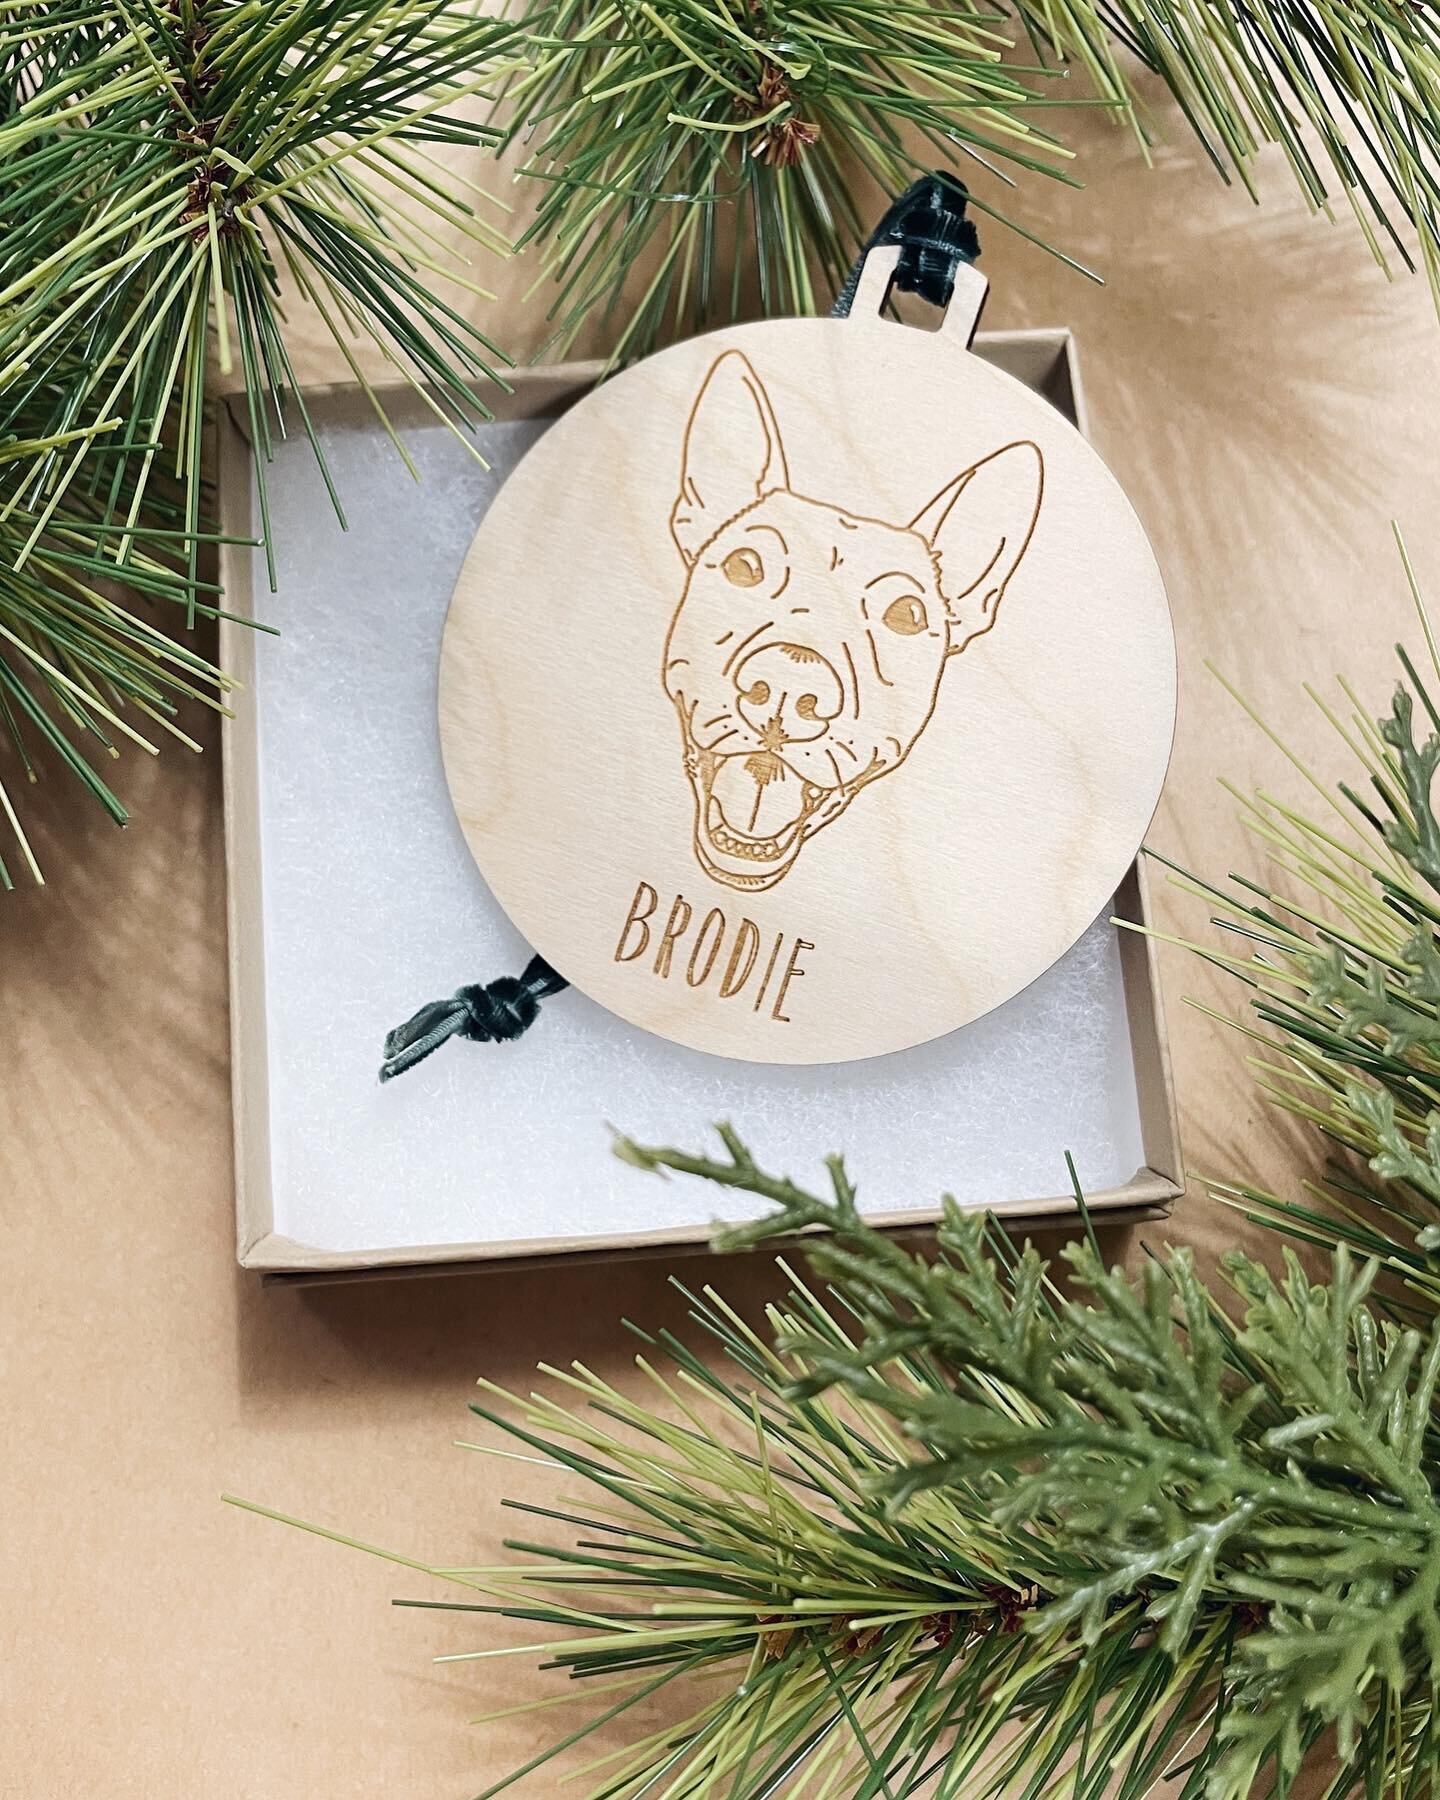 Have I mentioned lately that I love getting your custom ornament orders and sending them out to you. It&rsquo;s a joy to create ornaments that commemorate a milestone, perfectly capture your pet, or make the perfect gift.

Also, can we talk about how